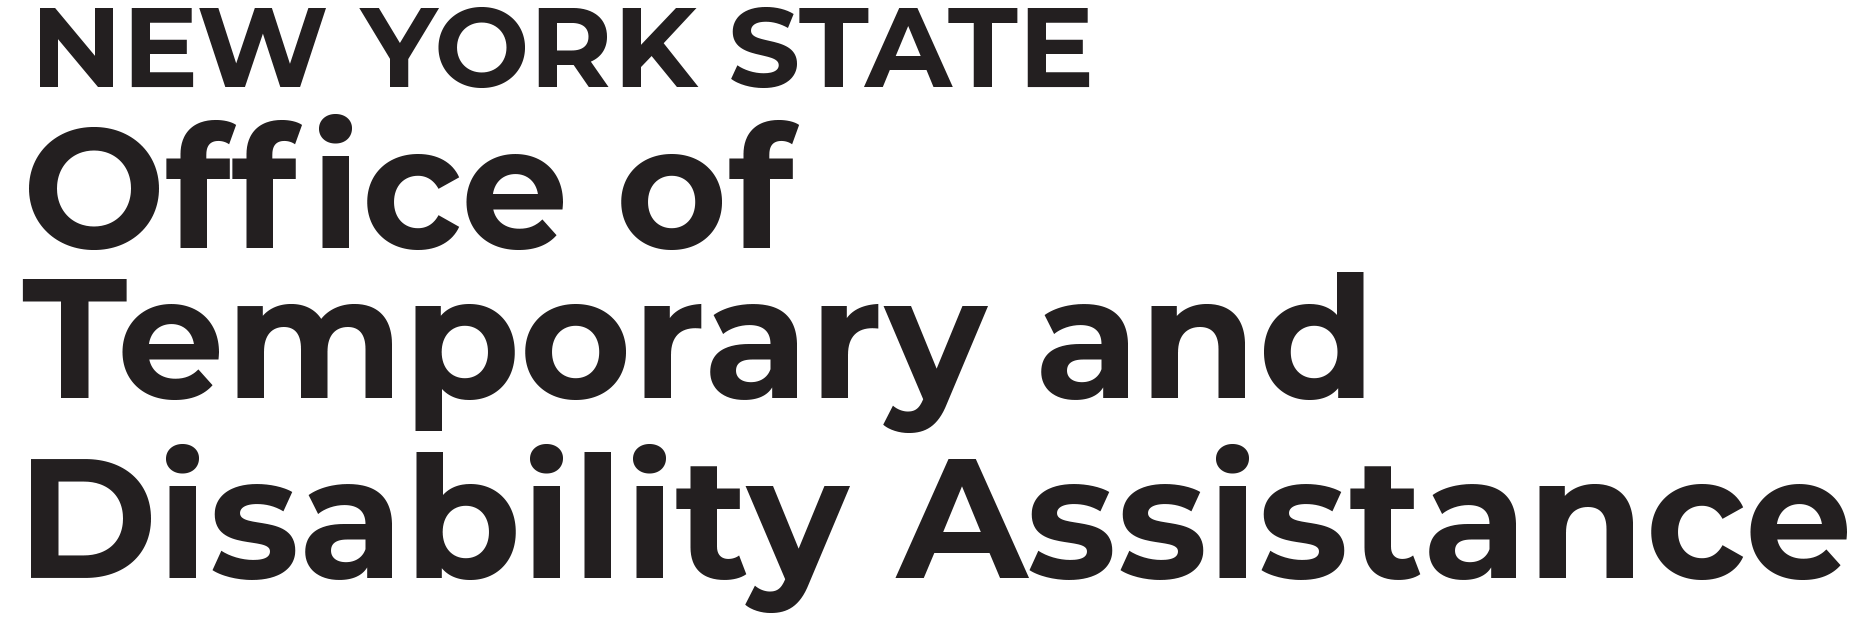 New York State Office of Temporary and Disability Assistance